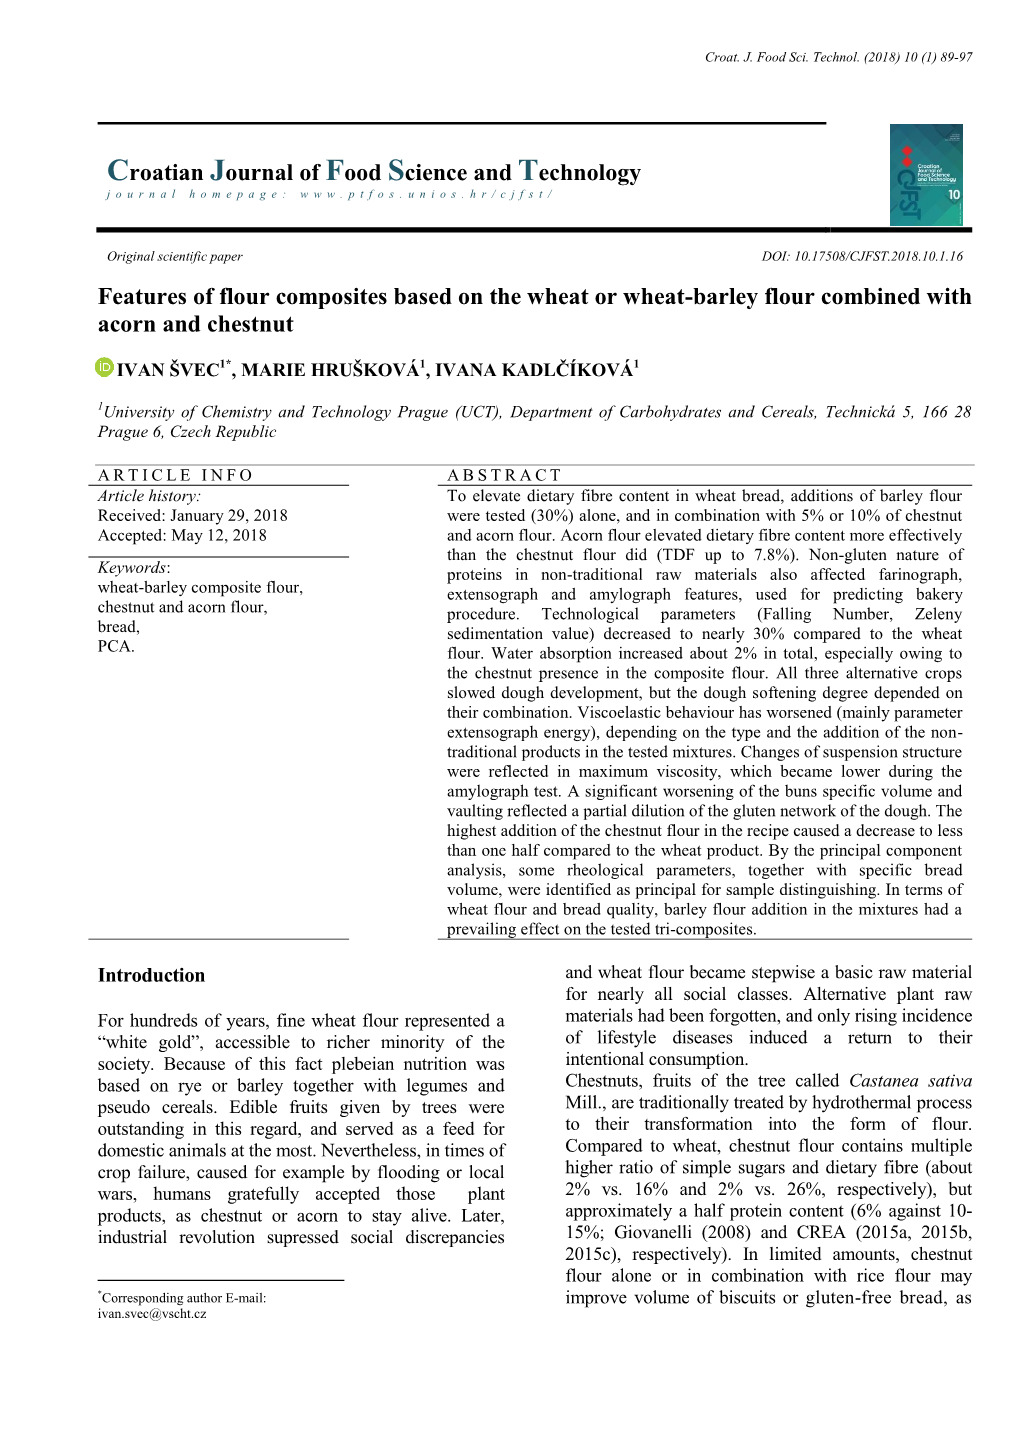 Croatian Journal of Food Science and Technology Features of Flour Composites Based on the Wheat Or Wheat-Barley Flour Combined W